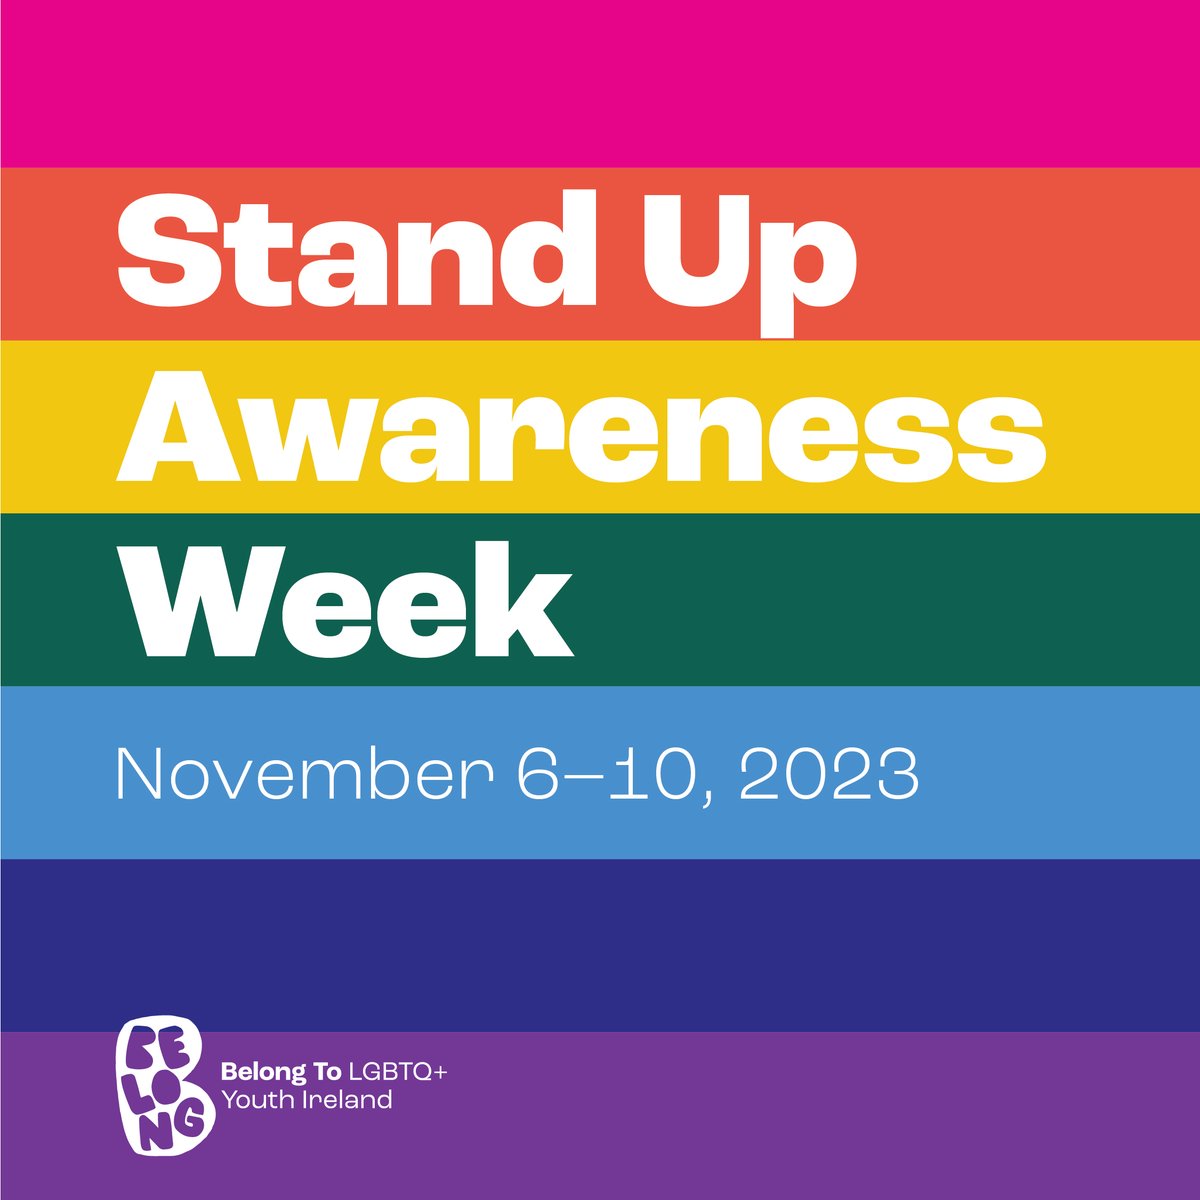 Stand Up Awareness Week is on 6-10 Nov in post-primary schools and Youthreach Centres across Ireland.

This is named as an action in the department's Cineáltas: Action Plan on Bullying 2023-2027.

Visit belongto.org for your #StandUp23 guide and posters.

 #edchatie